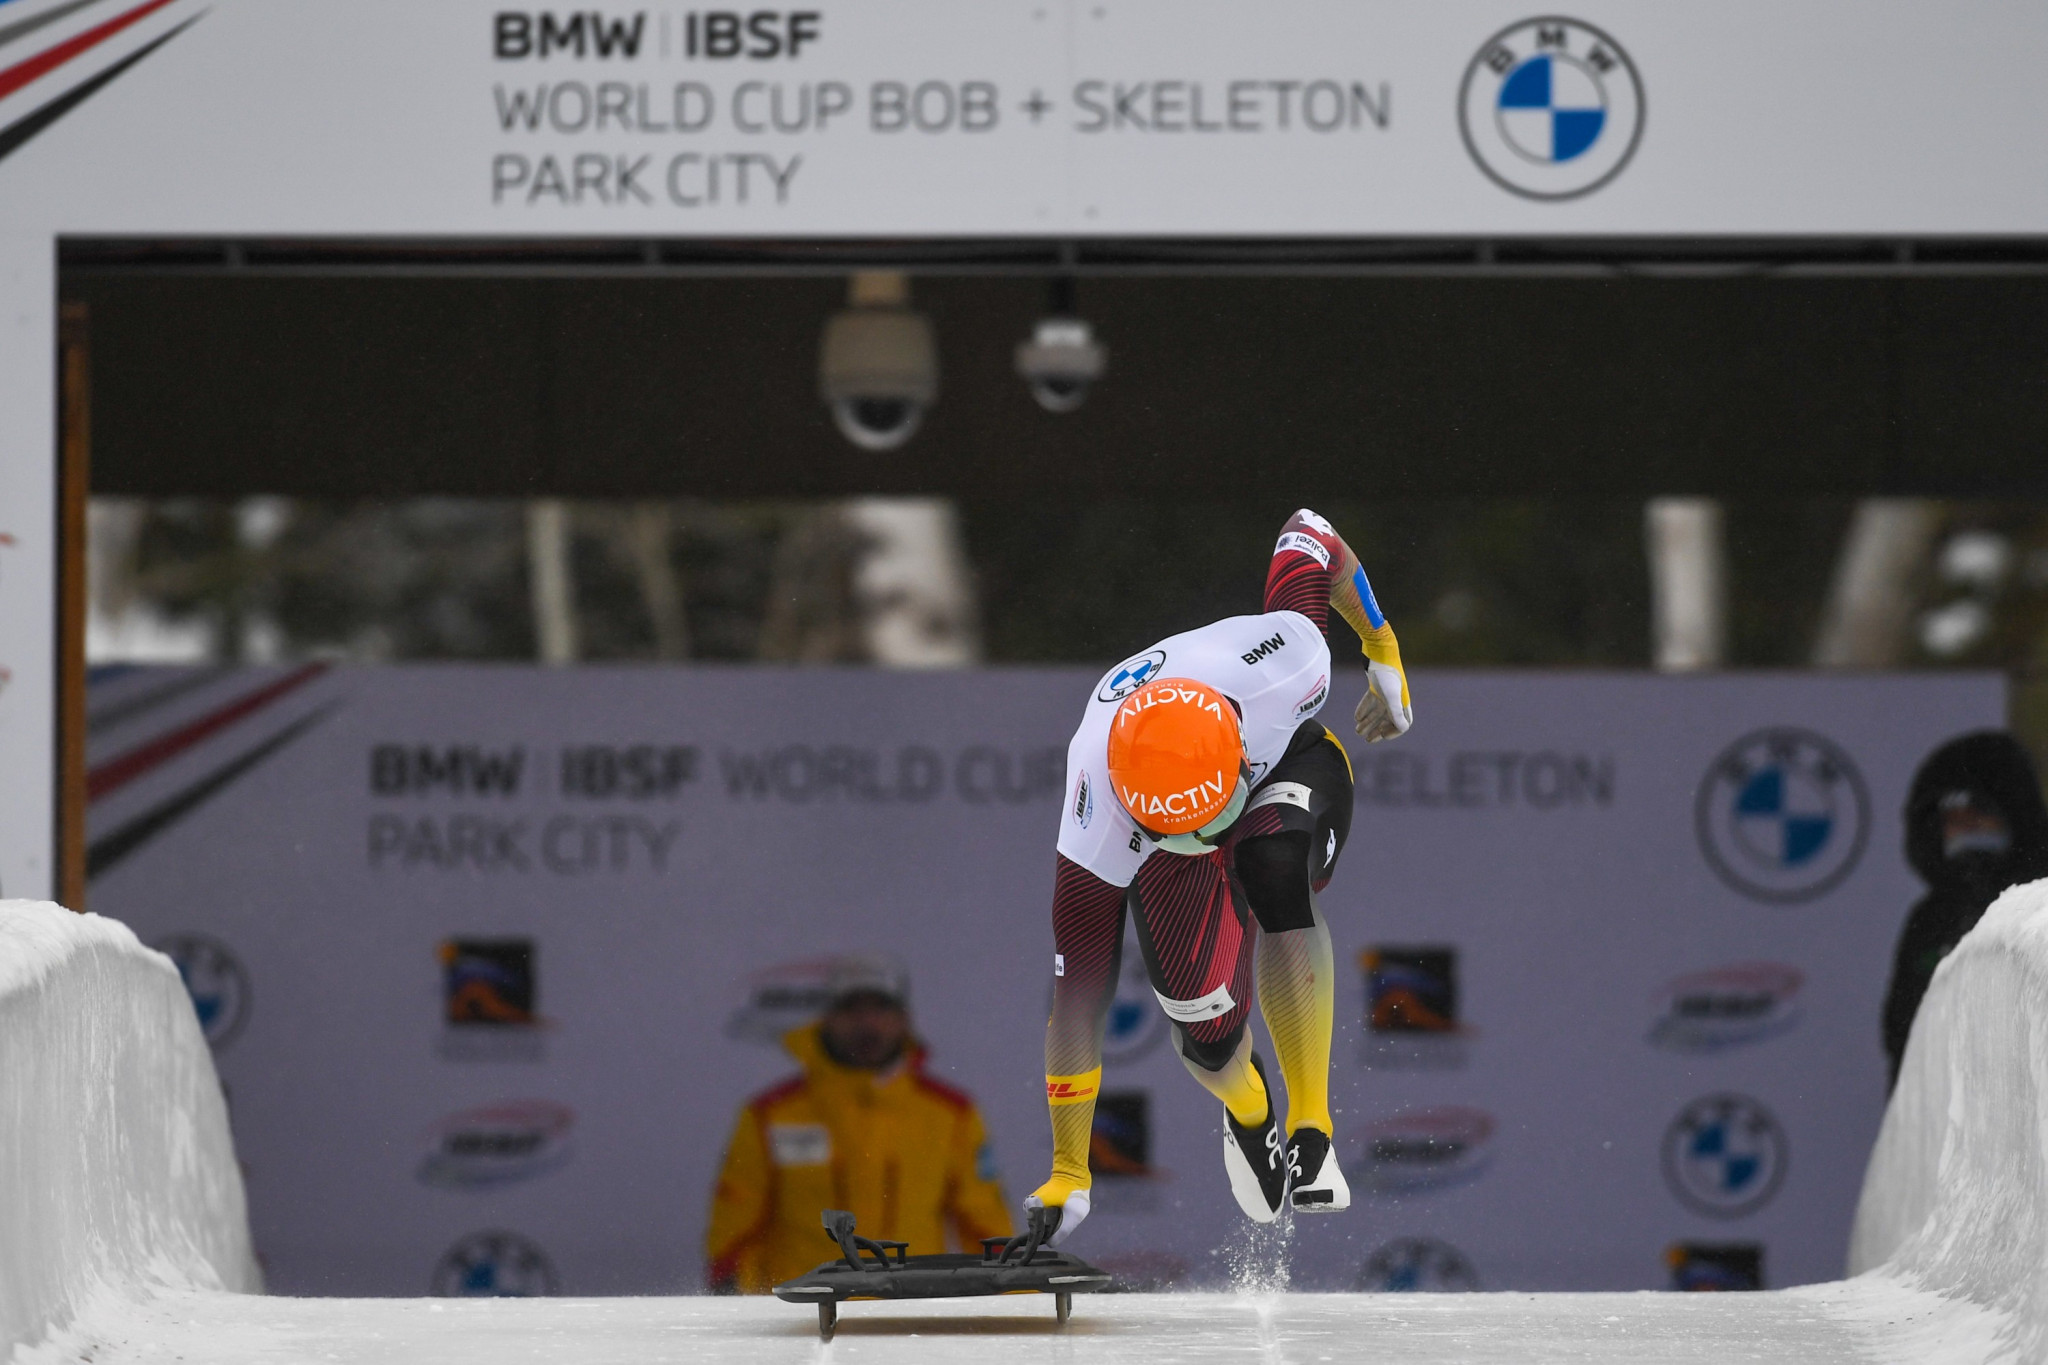 Olympic champion Christopher Grotheer collected a first win of the IBSF World Cup season ©IBSF